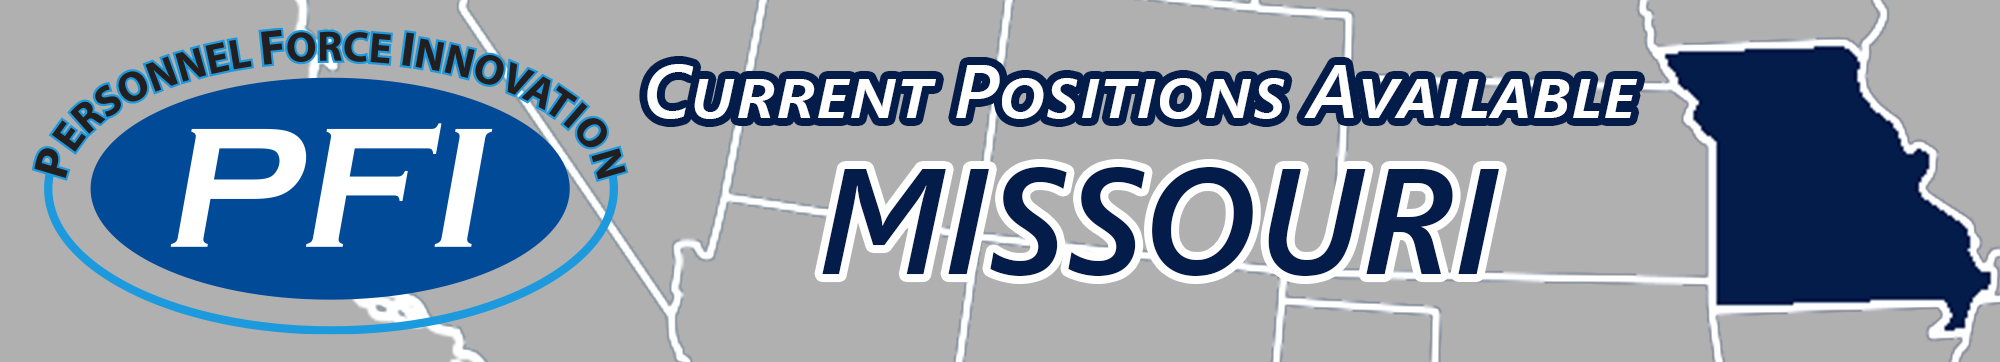 Decorative banner that says Personnel Force Innovation (PFI) current positions available in Missouri